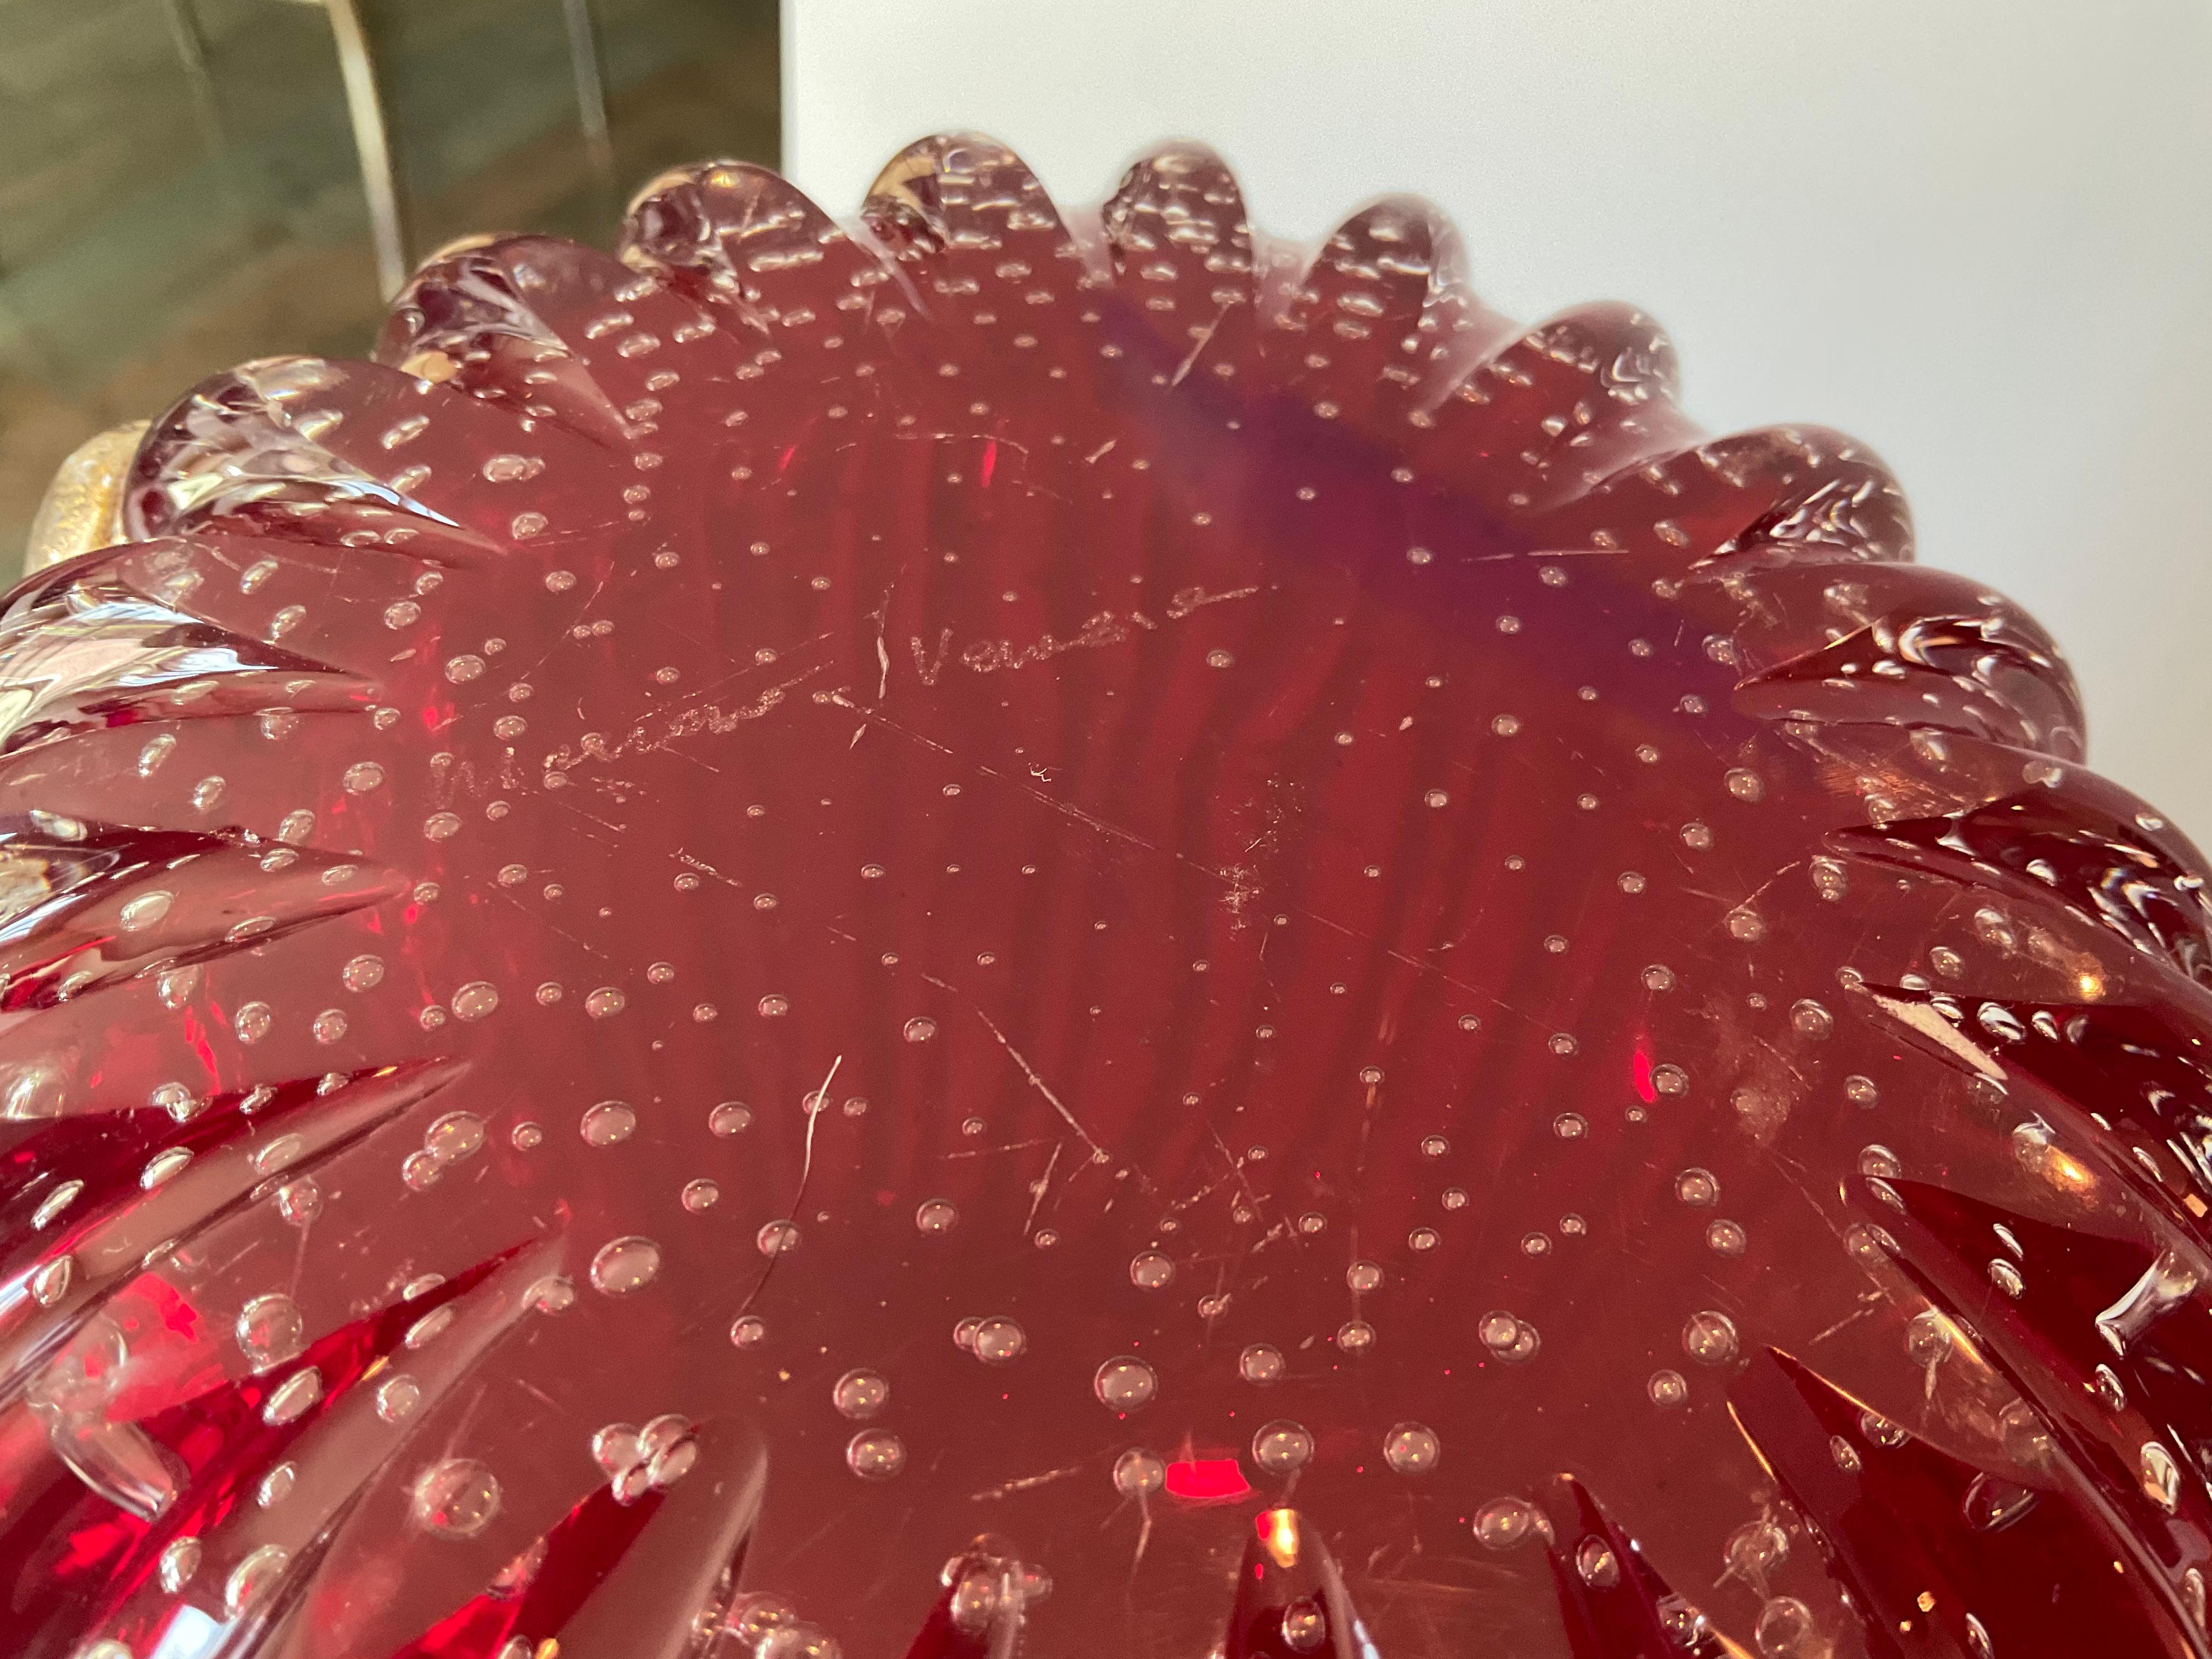 Large Vibrant Red Barovier Style Murano Art Glass Vase with Controlled Bubbles In Good Condition For Sale In Ann Arbor, MI